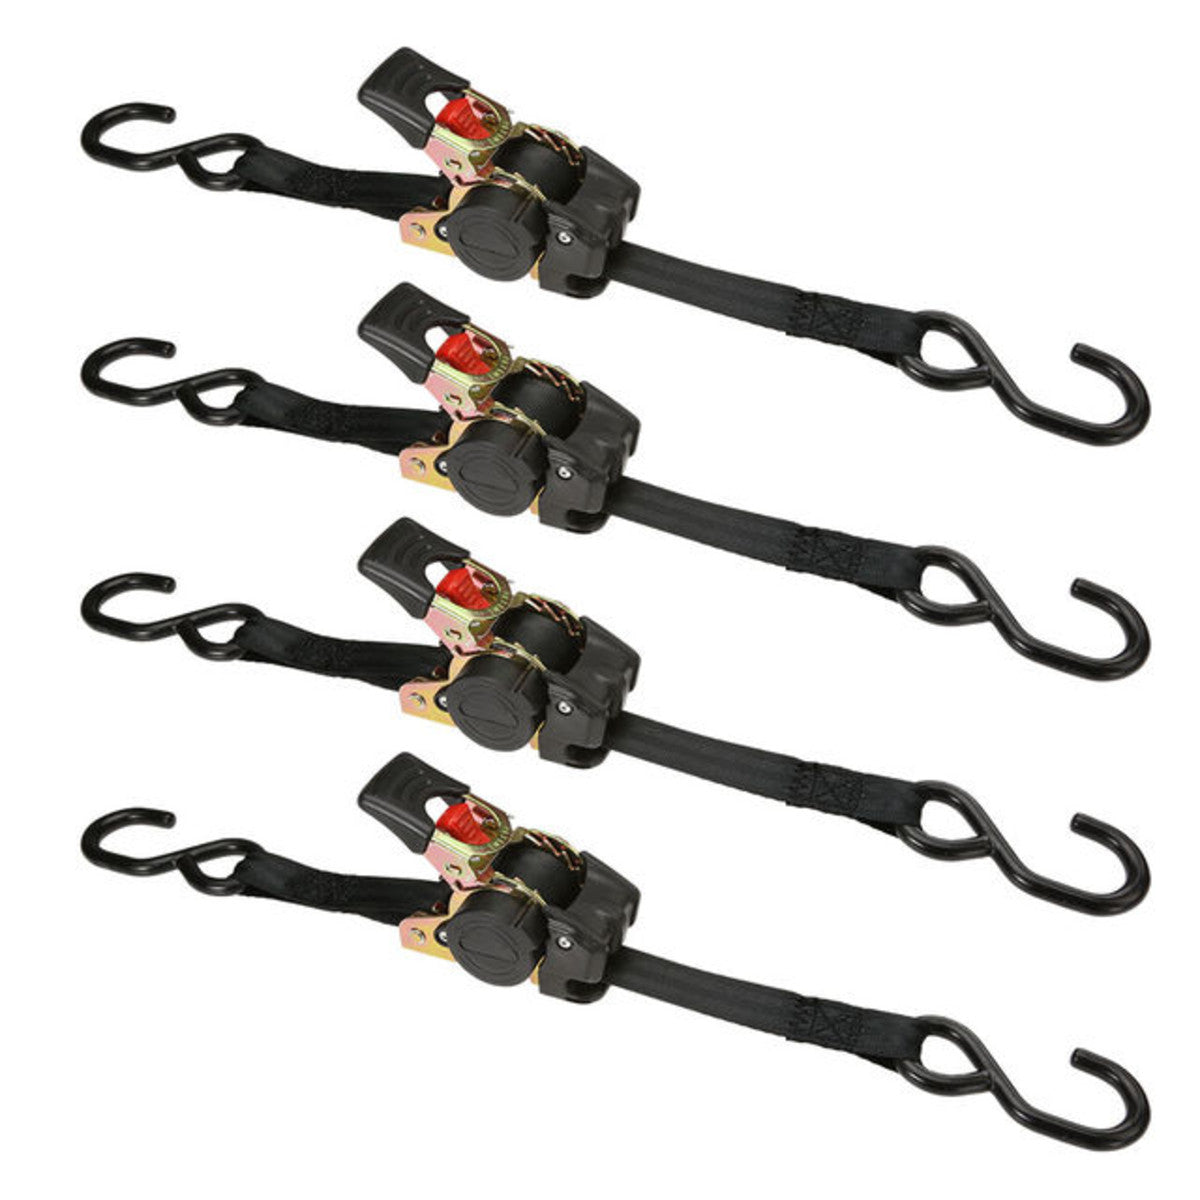 1" x 6' Retractable Ratchet w/ Vinyl Coated S-Hooks and Push Button Release - 4 PK